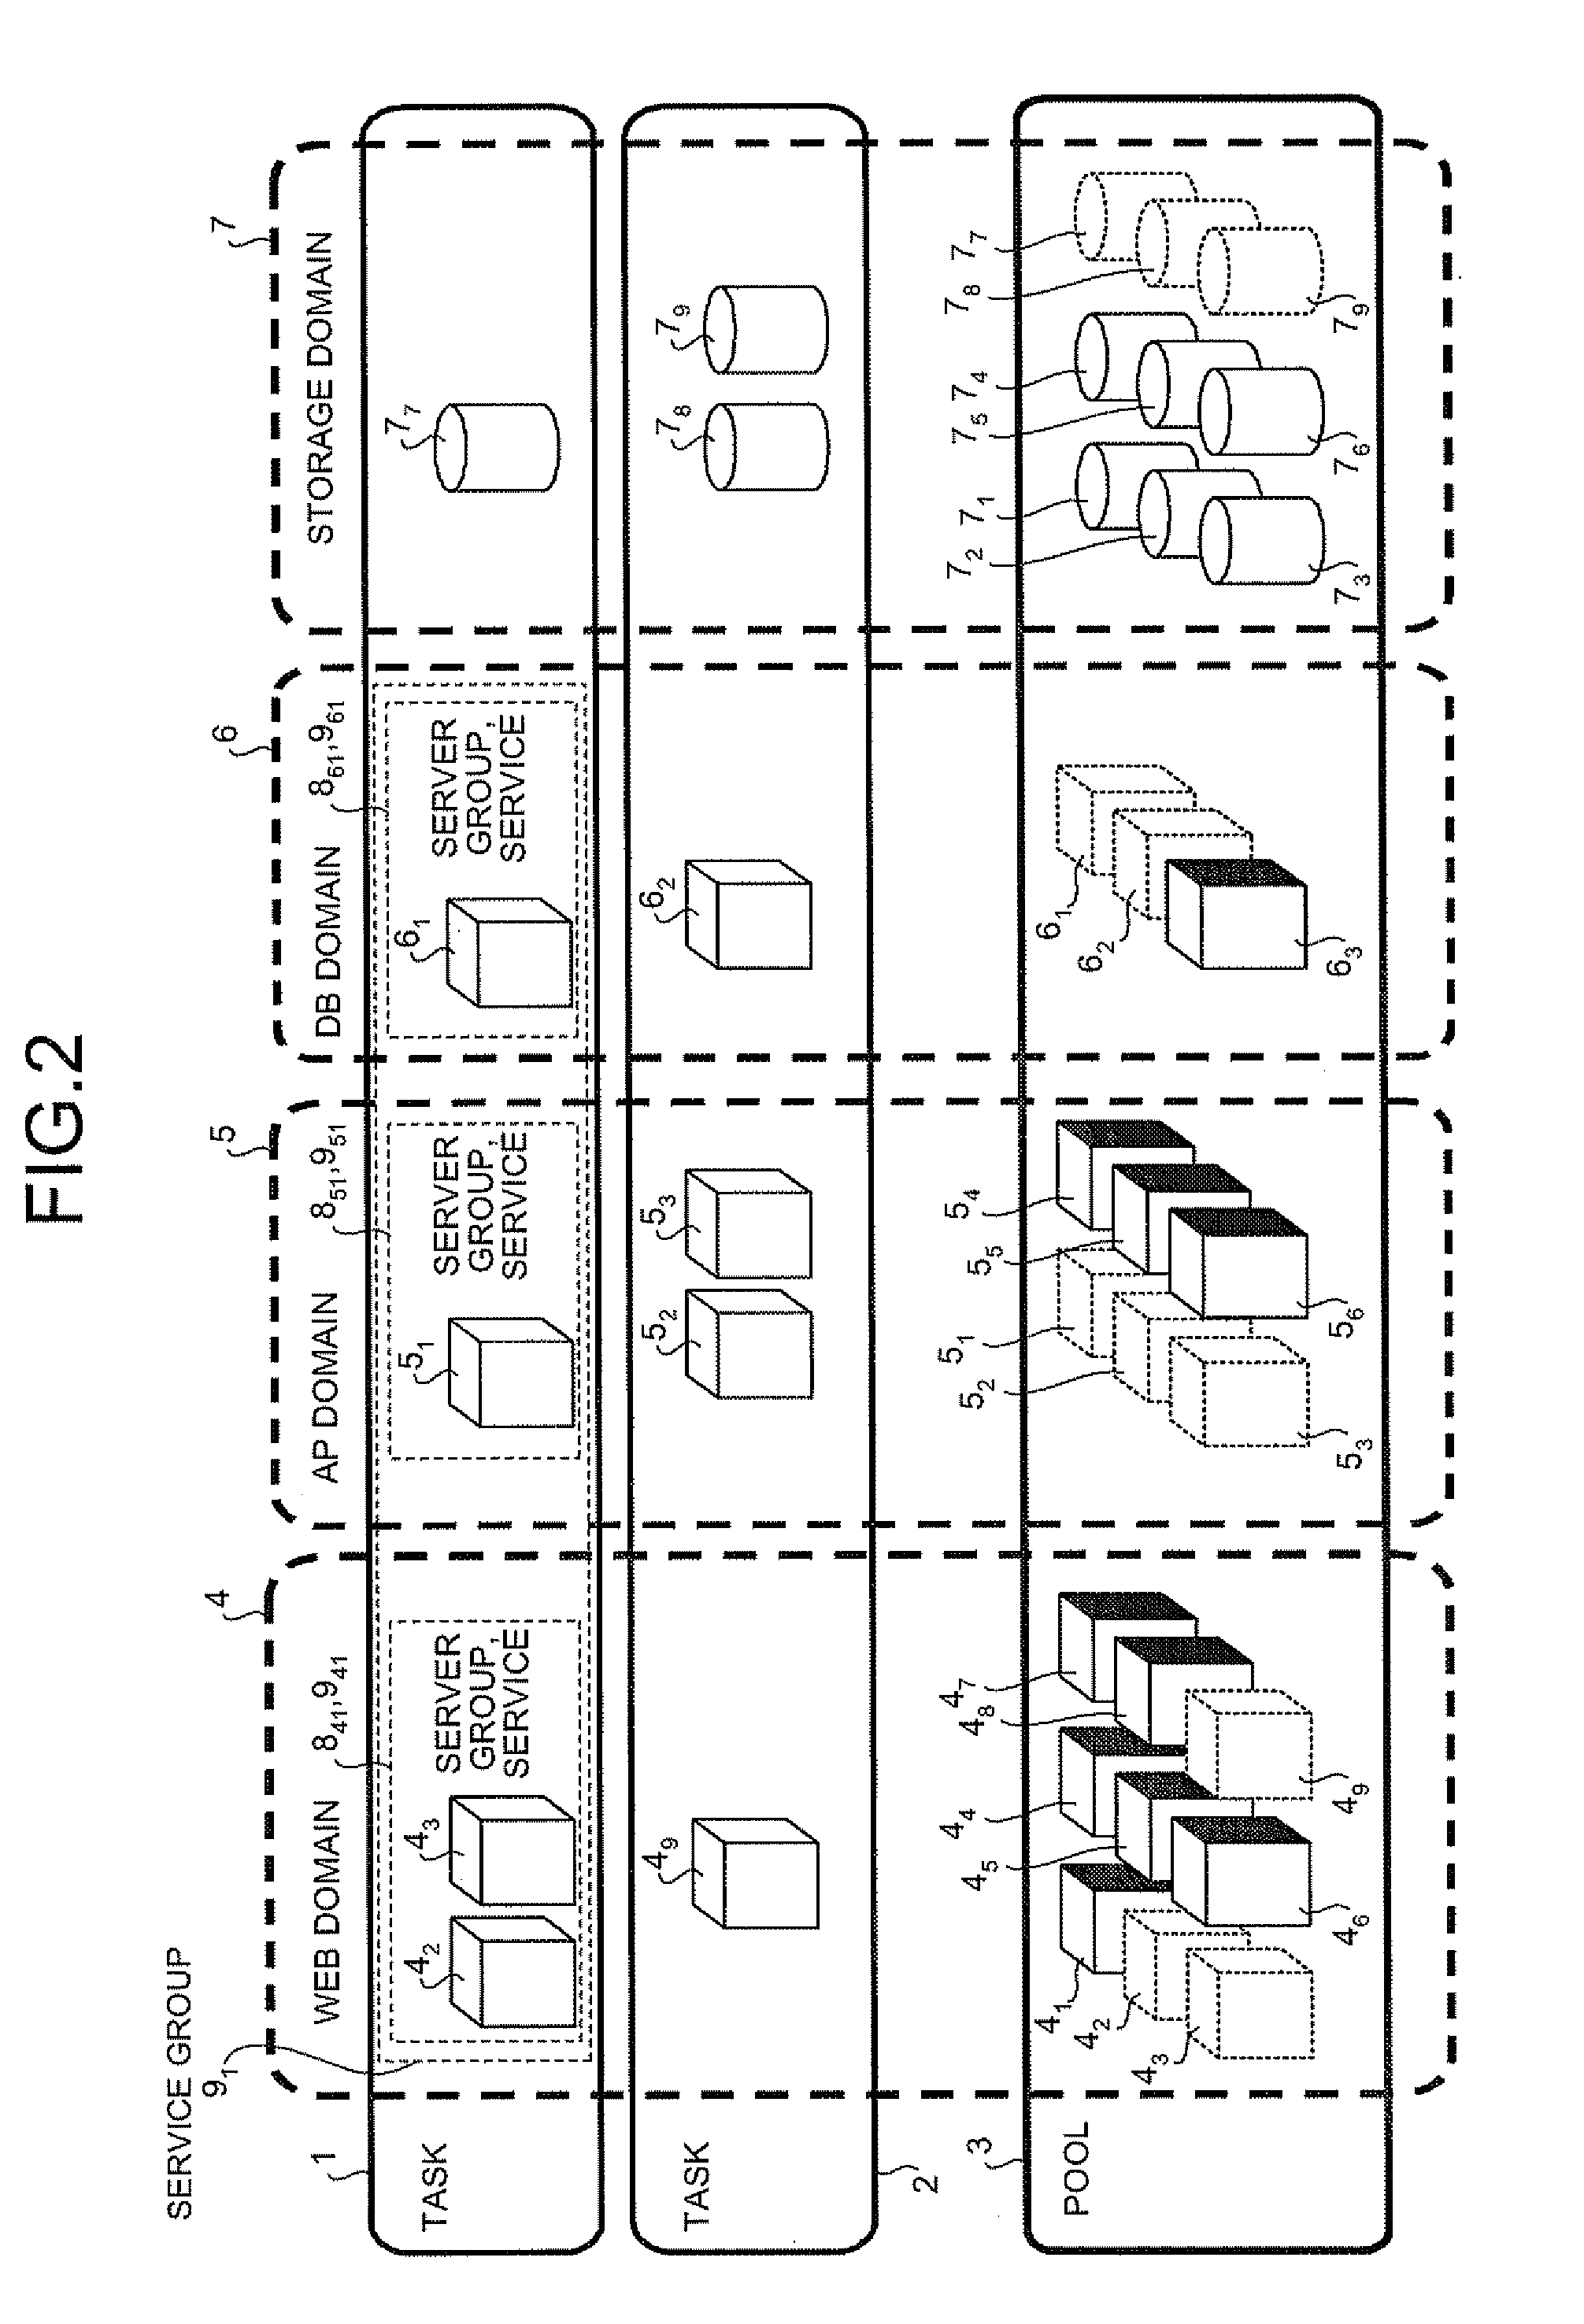 Computer product, operation management method, and operation management apparatus